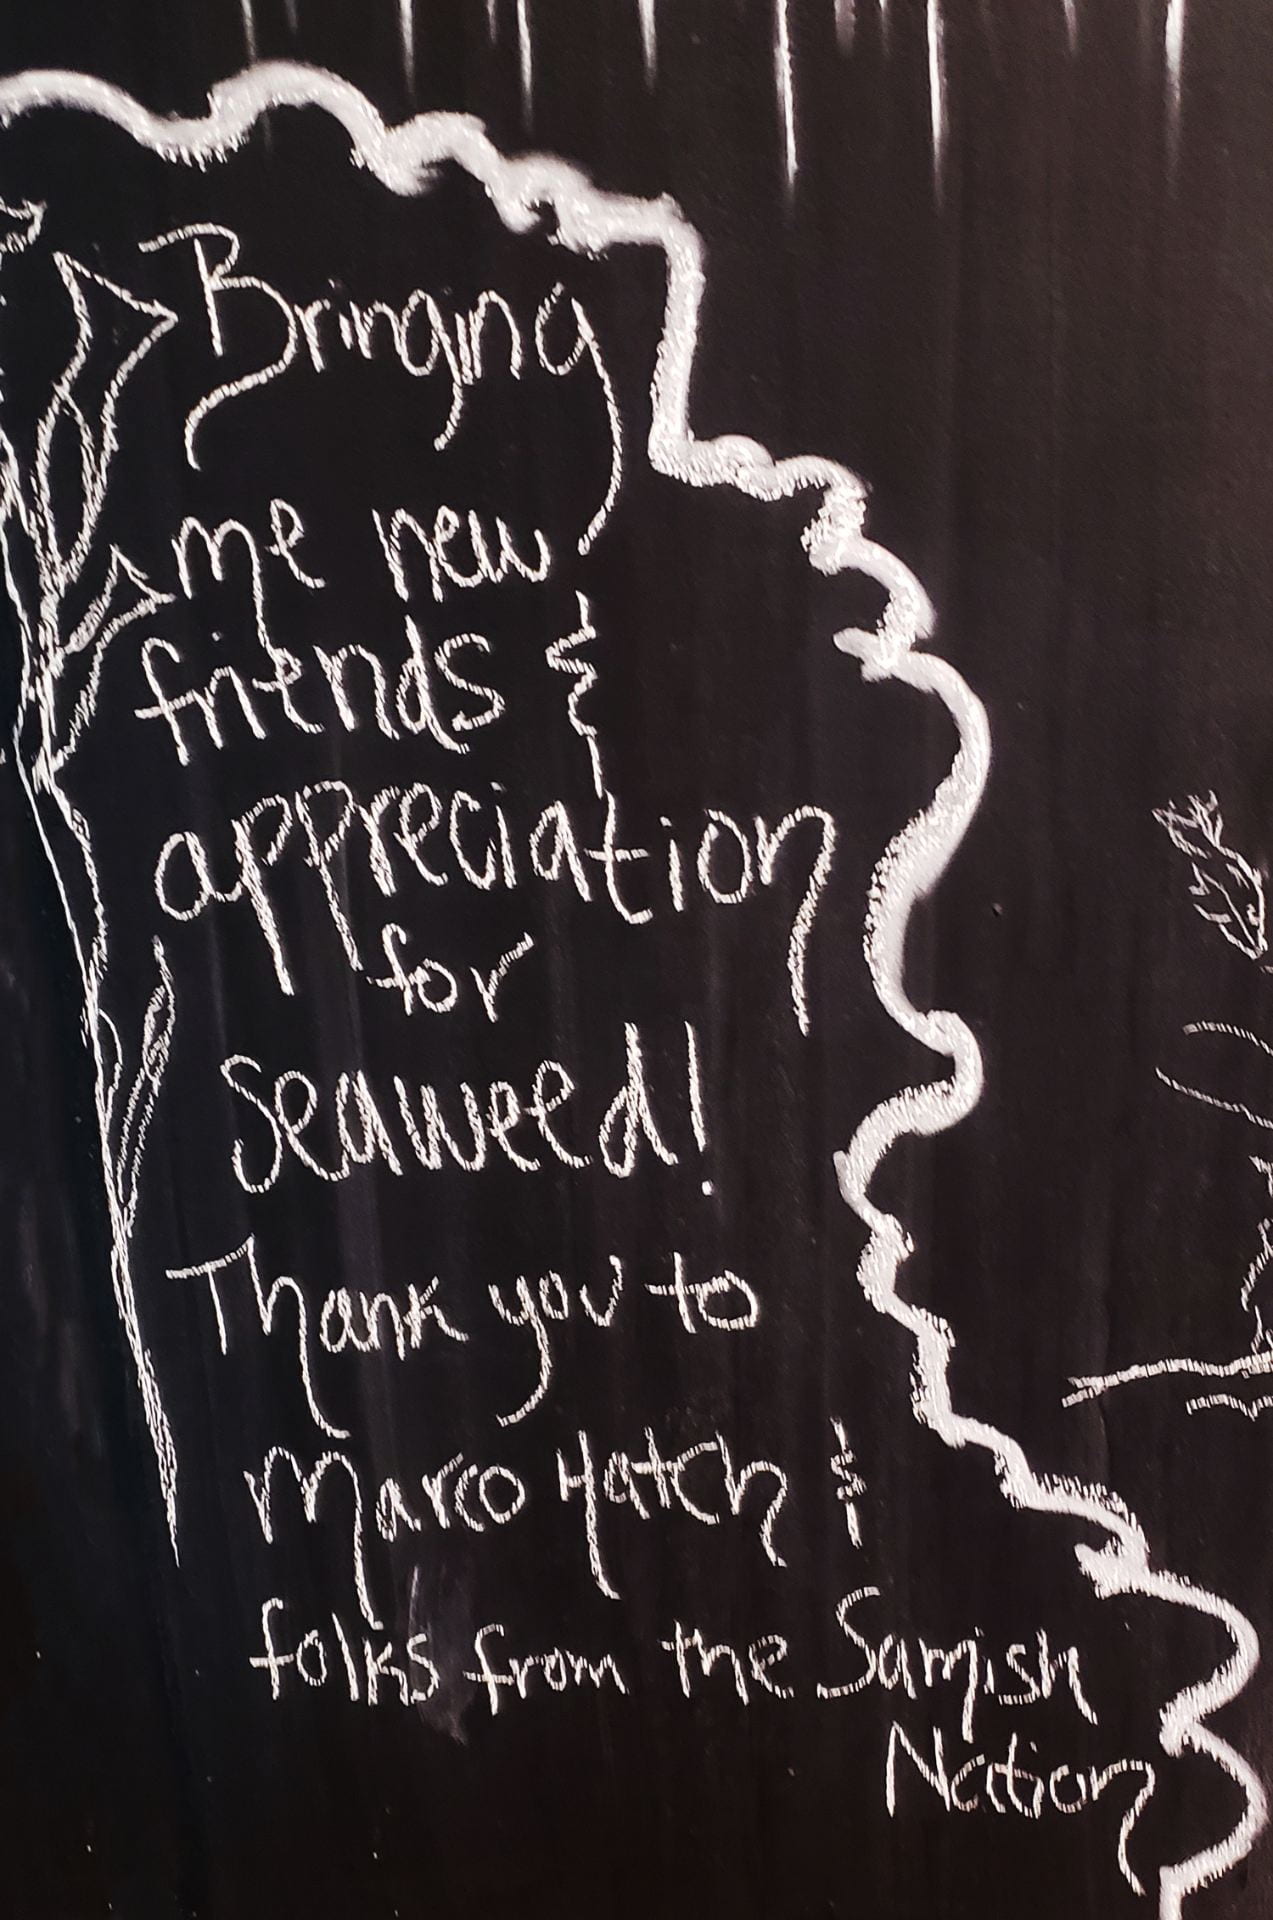 handwritten words on a chalkboard: "Bringing me new friends & appreciation for seaweed! Thank you to Marco Hatch & folks from the Samish Nation"